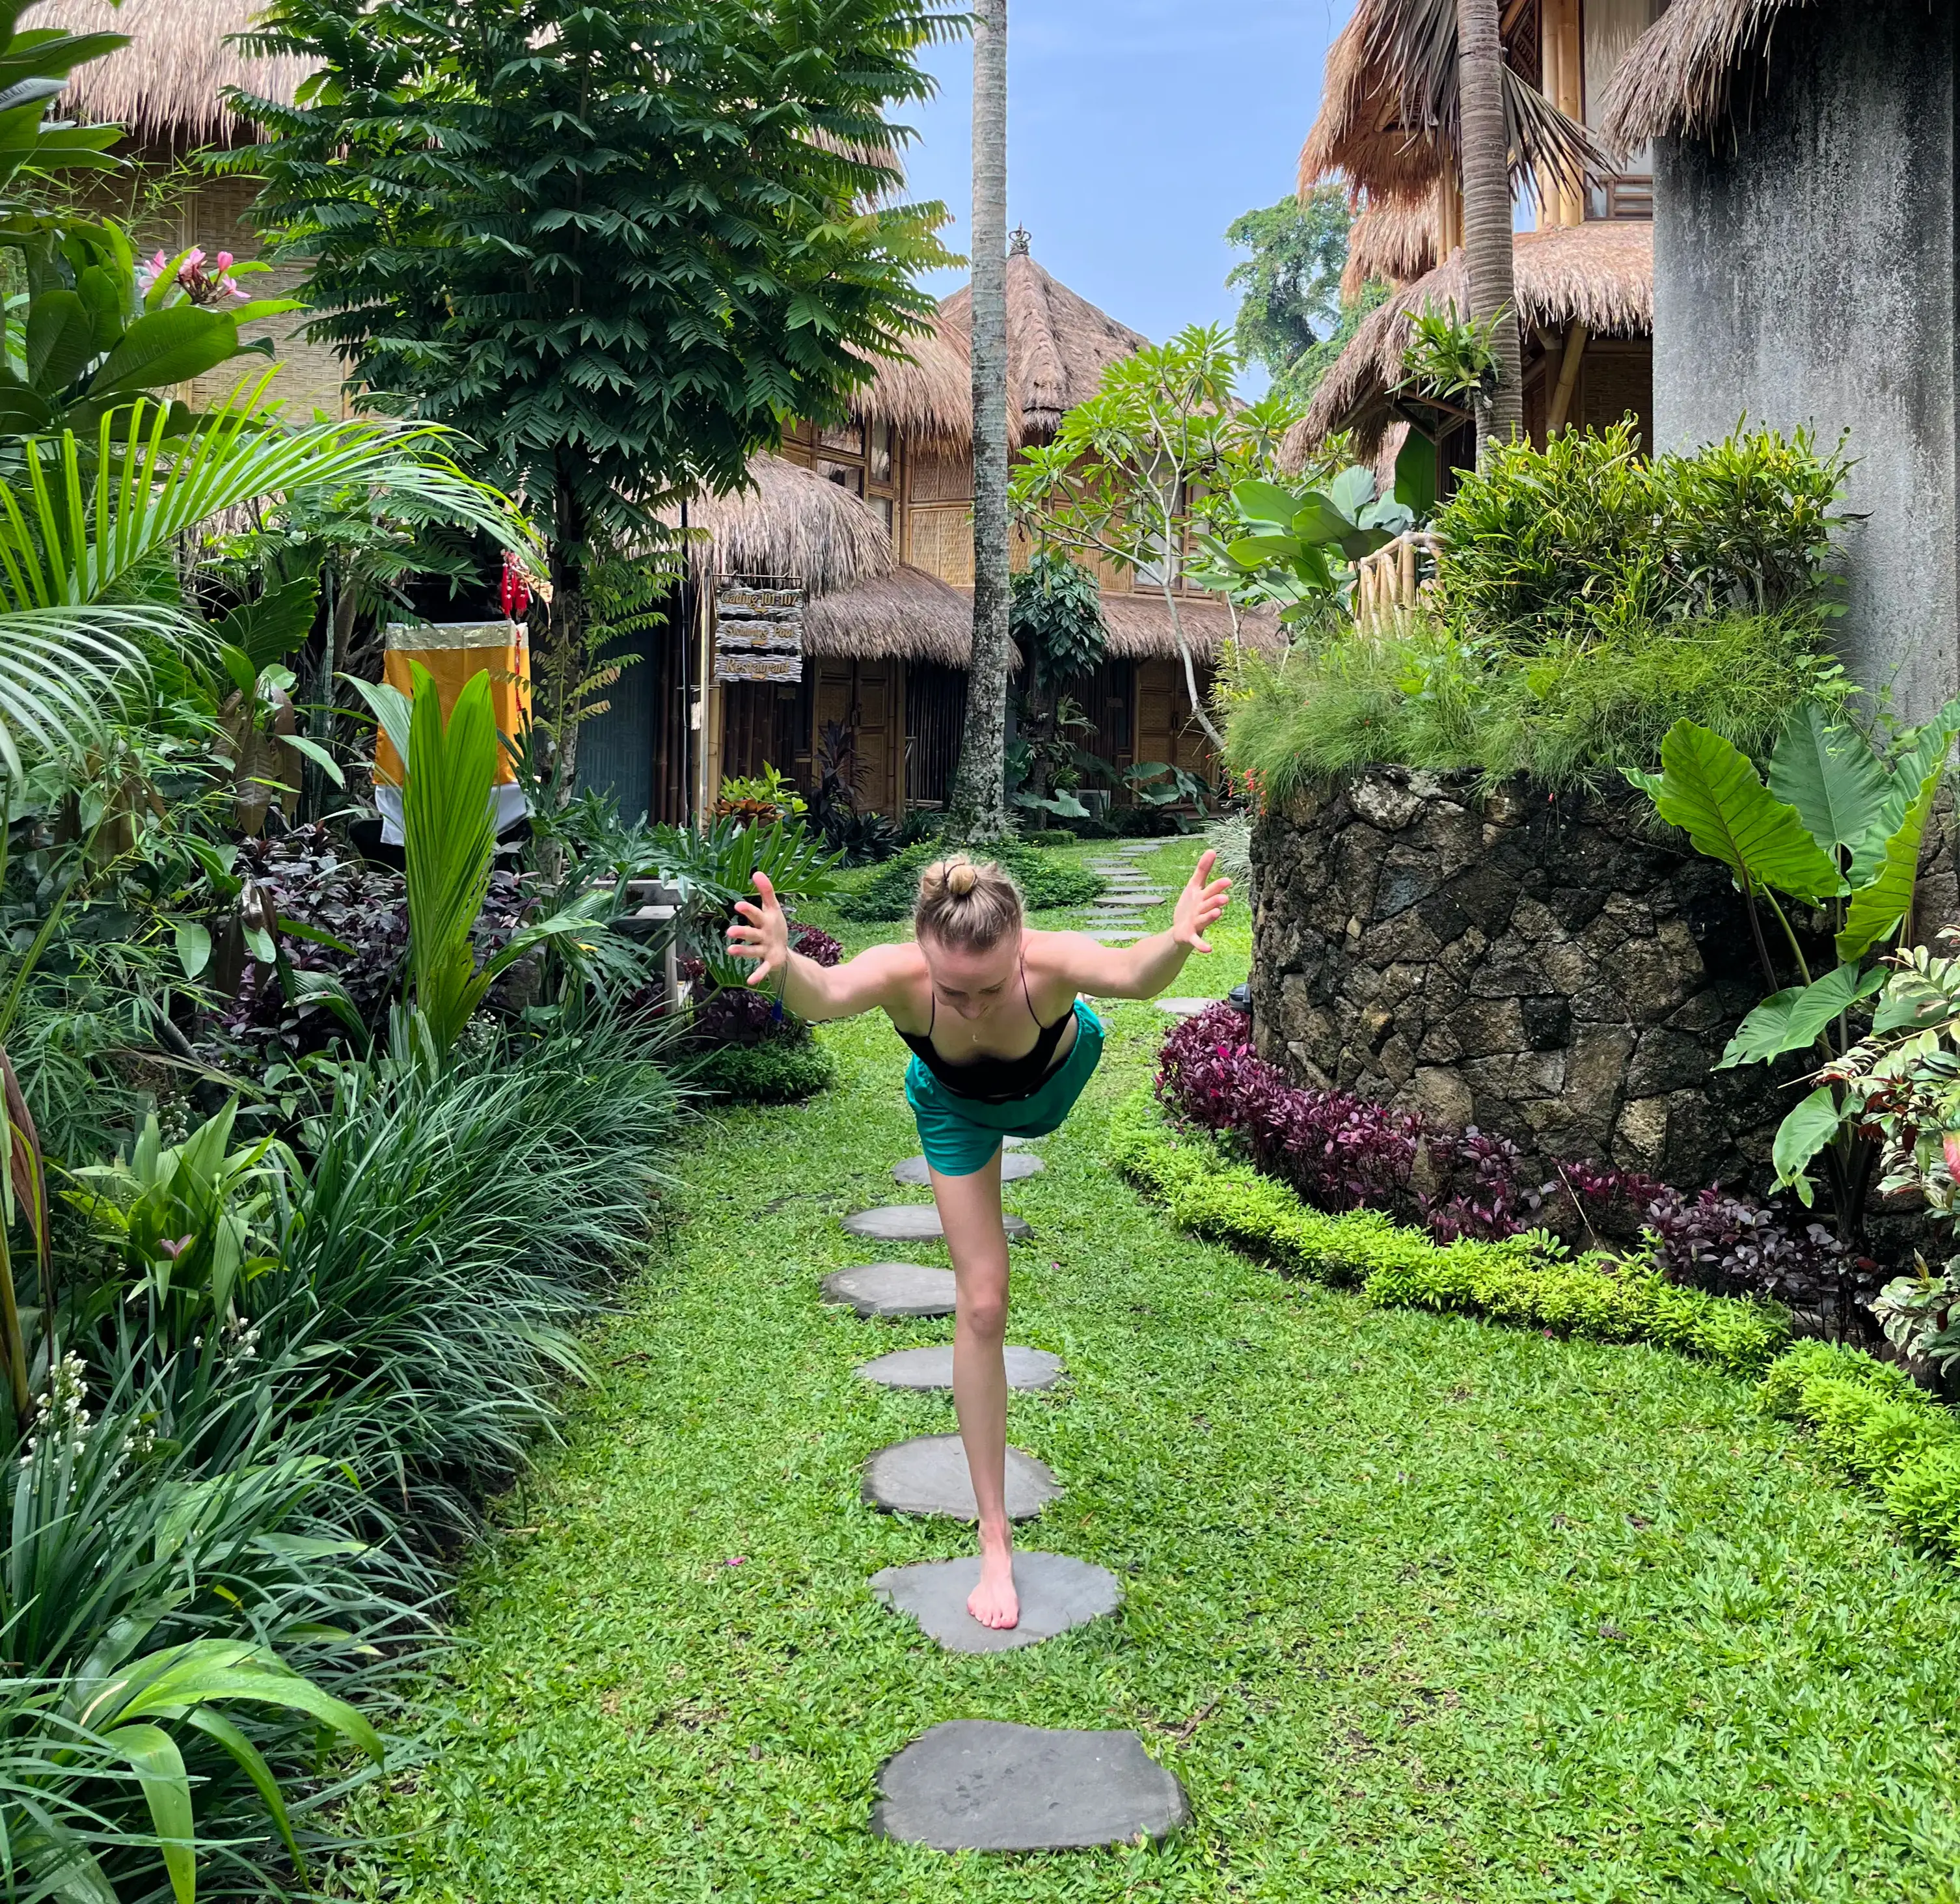 Girl in a yoga pose in a tropical landscape in Bali.